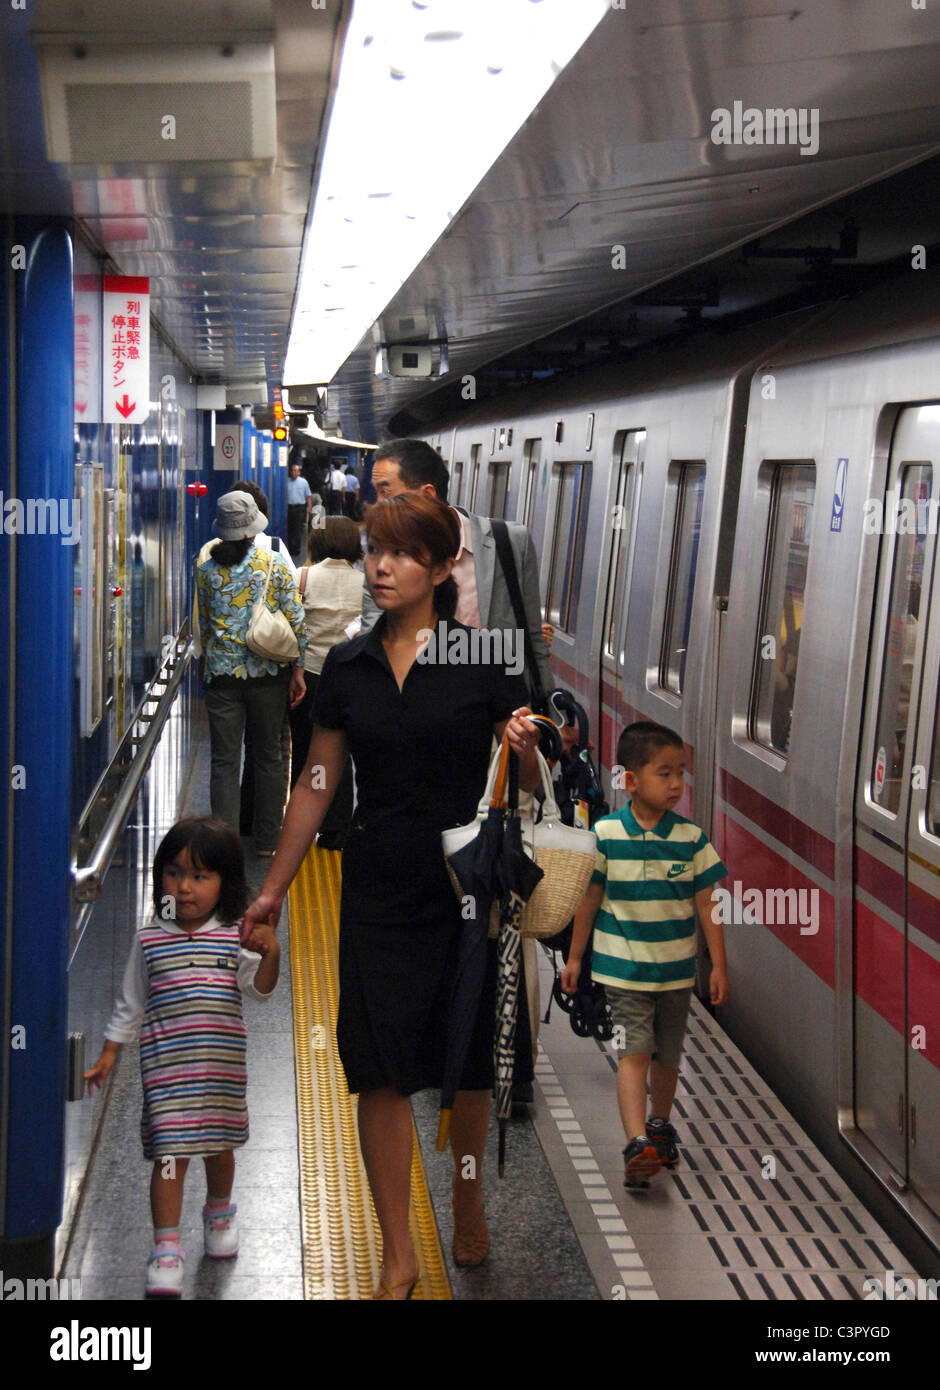 Japanese woman with two children leaving a Tokyo subway train, Tokyo Japan Stock Photo